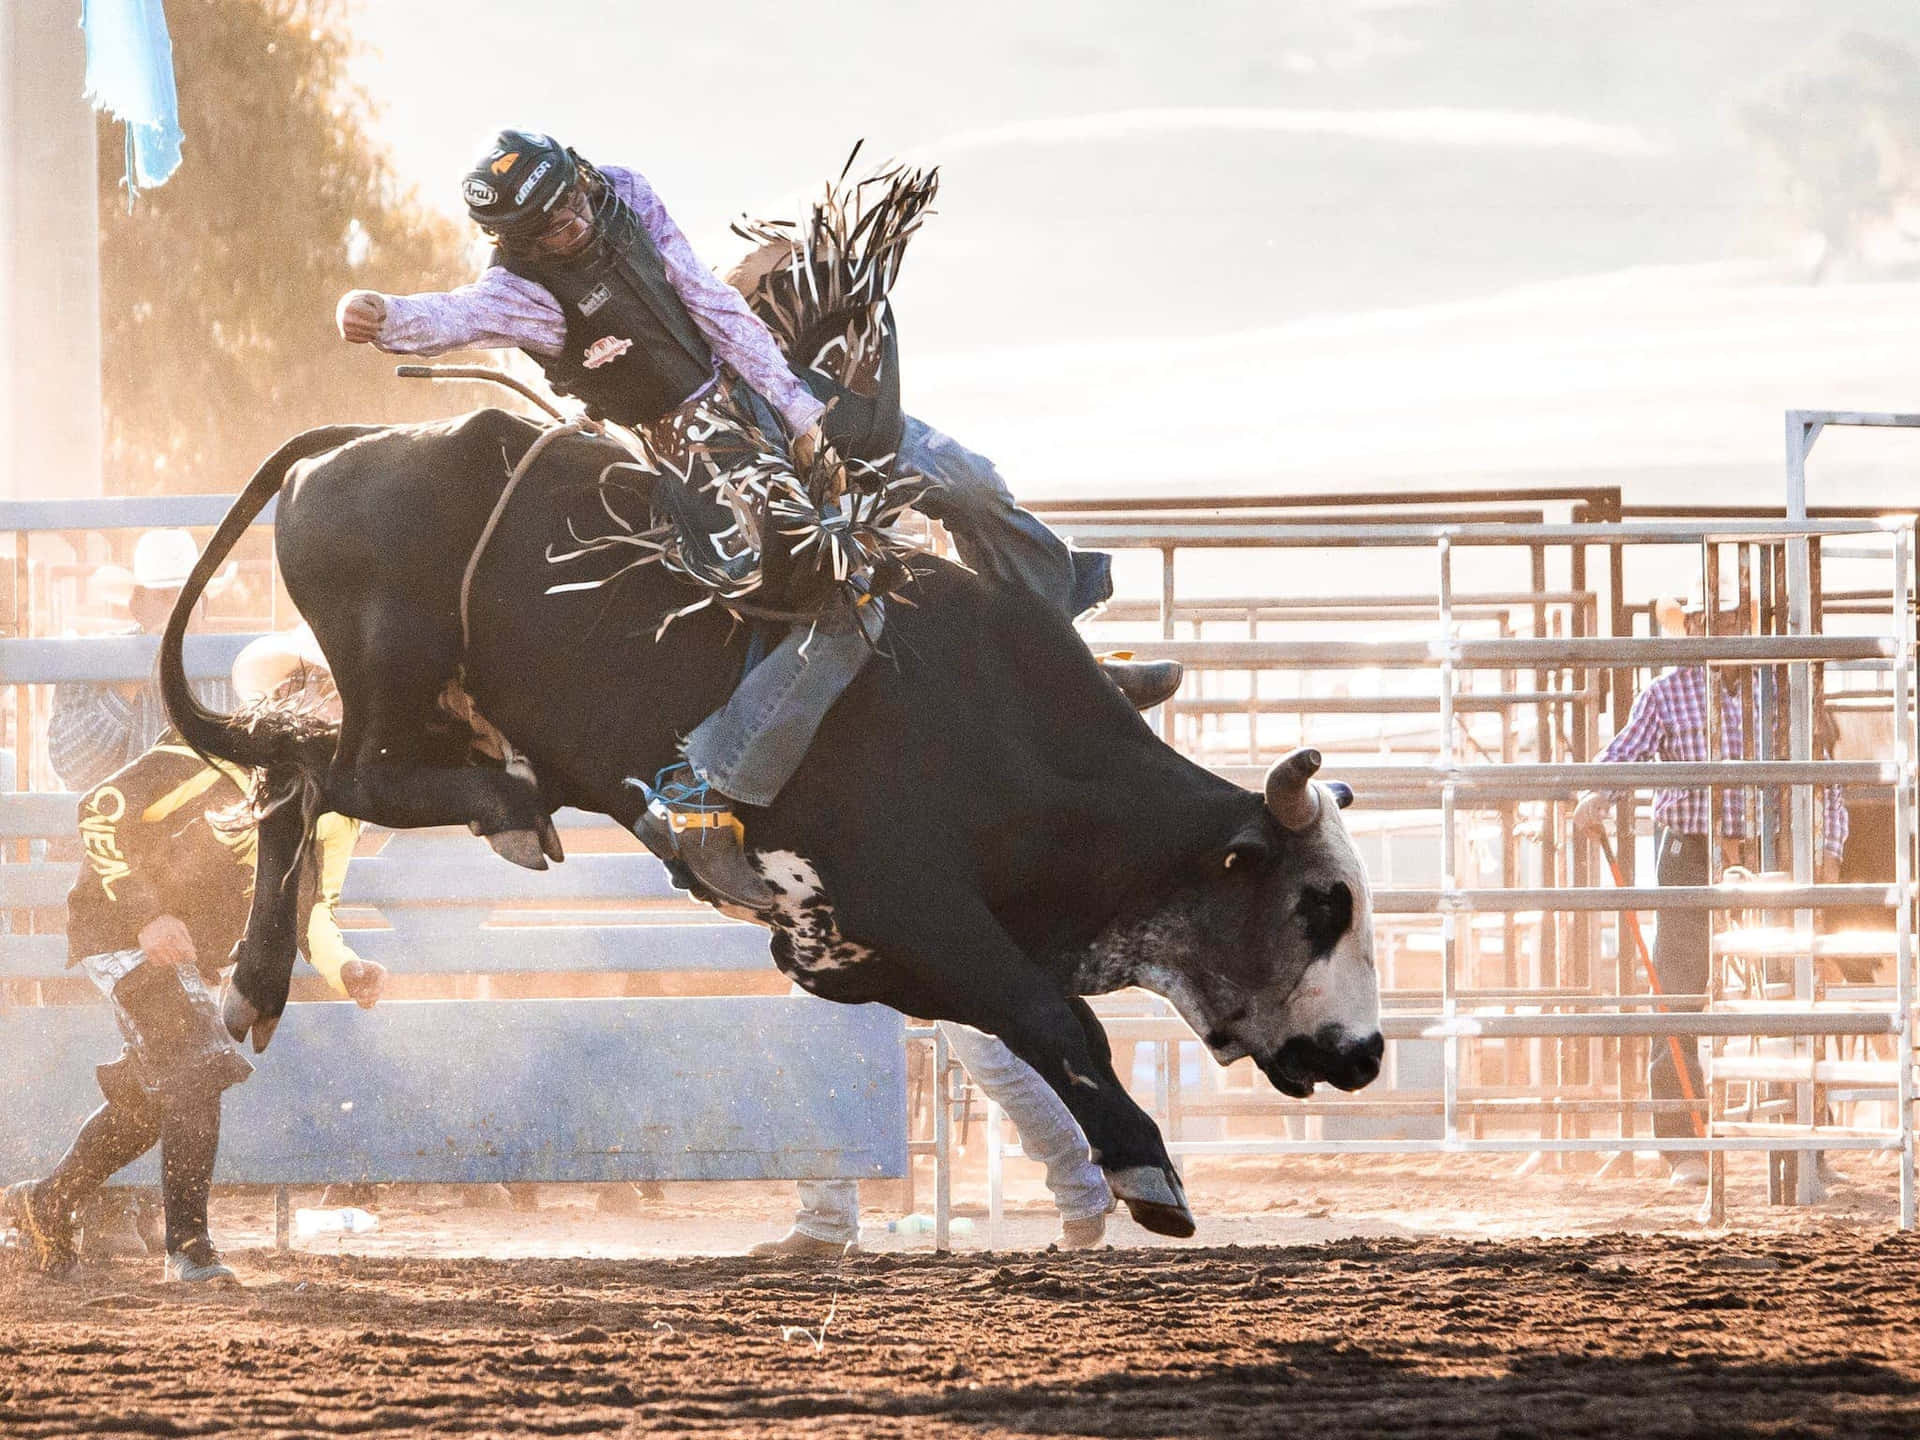 Cowboy Putting on a show in a Rodeo Arena